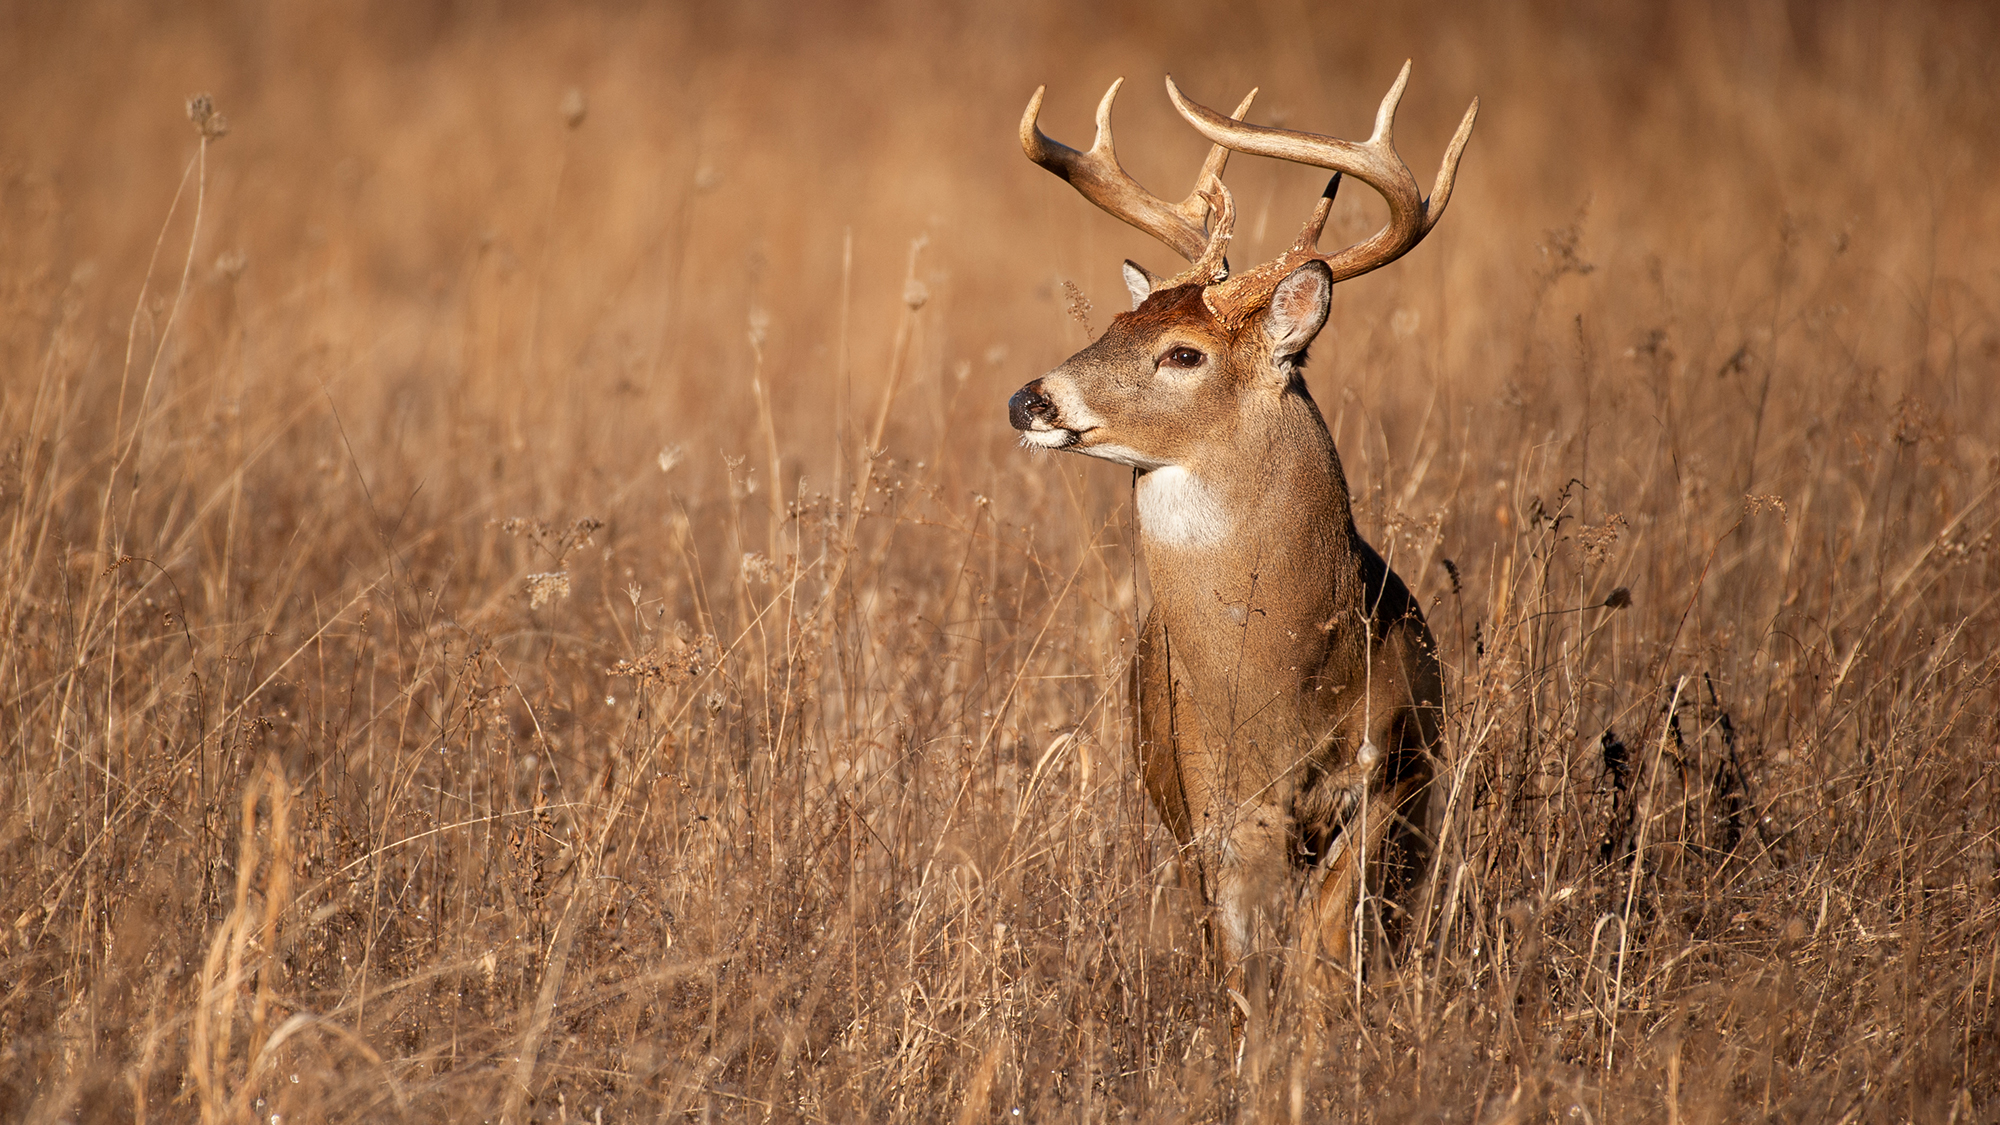 Private Landowners Can Save Public Hunting in America